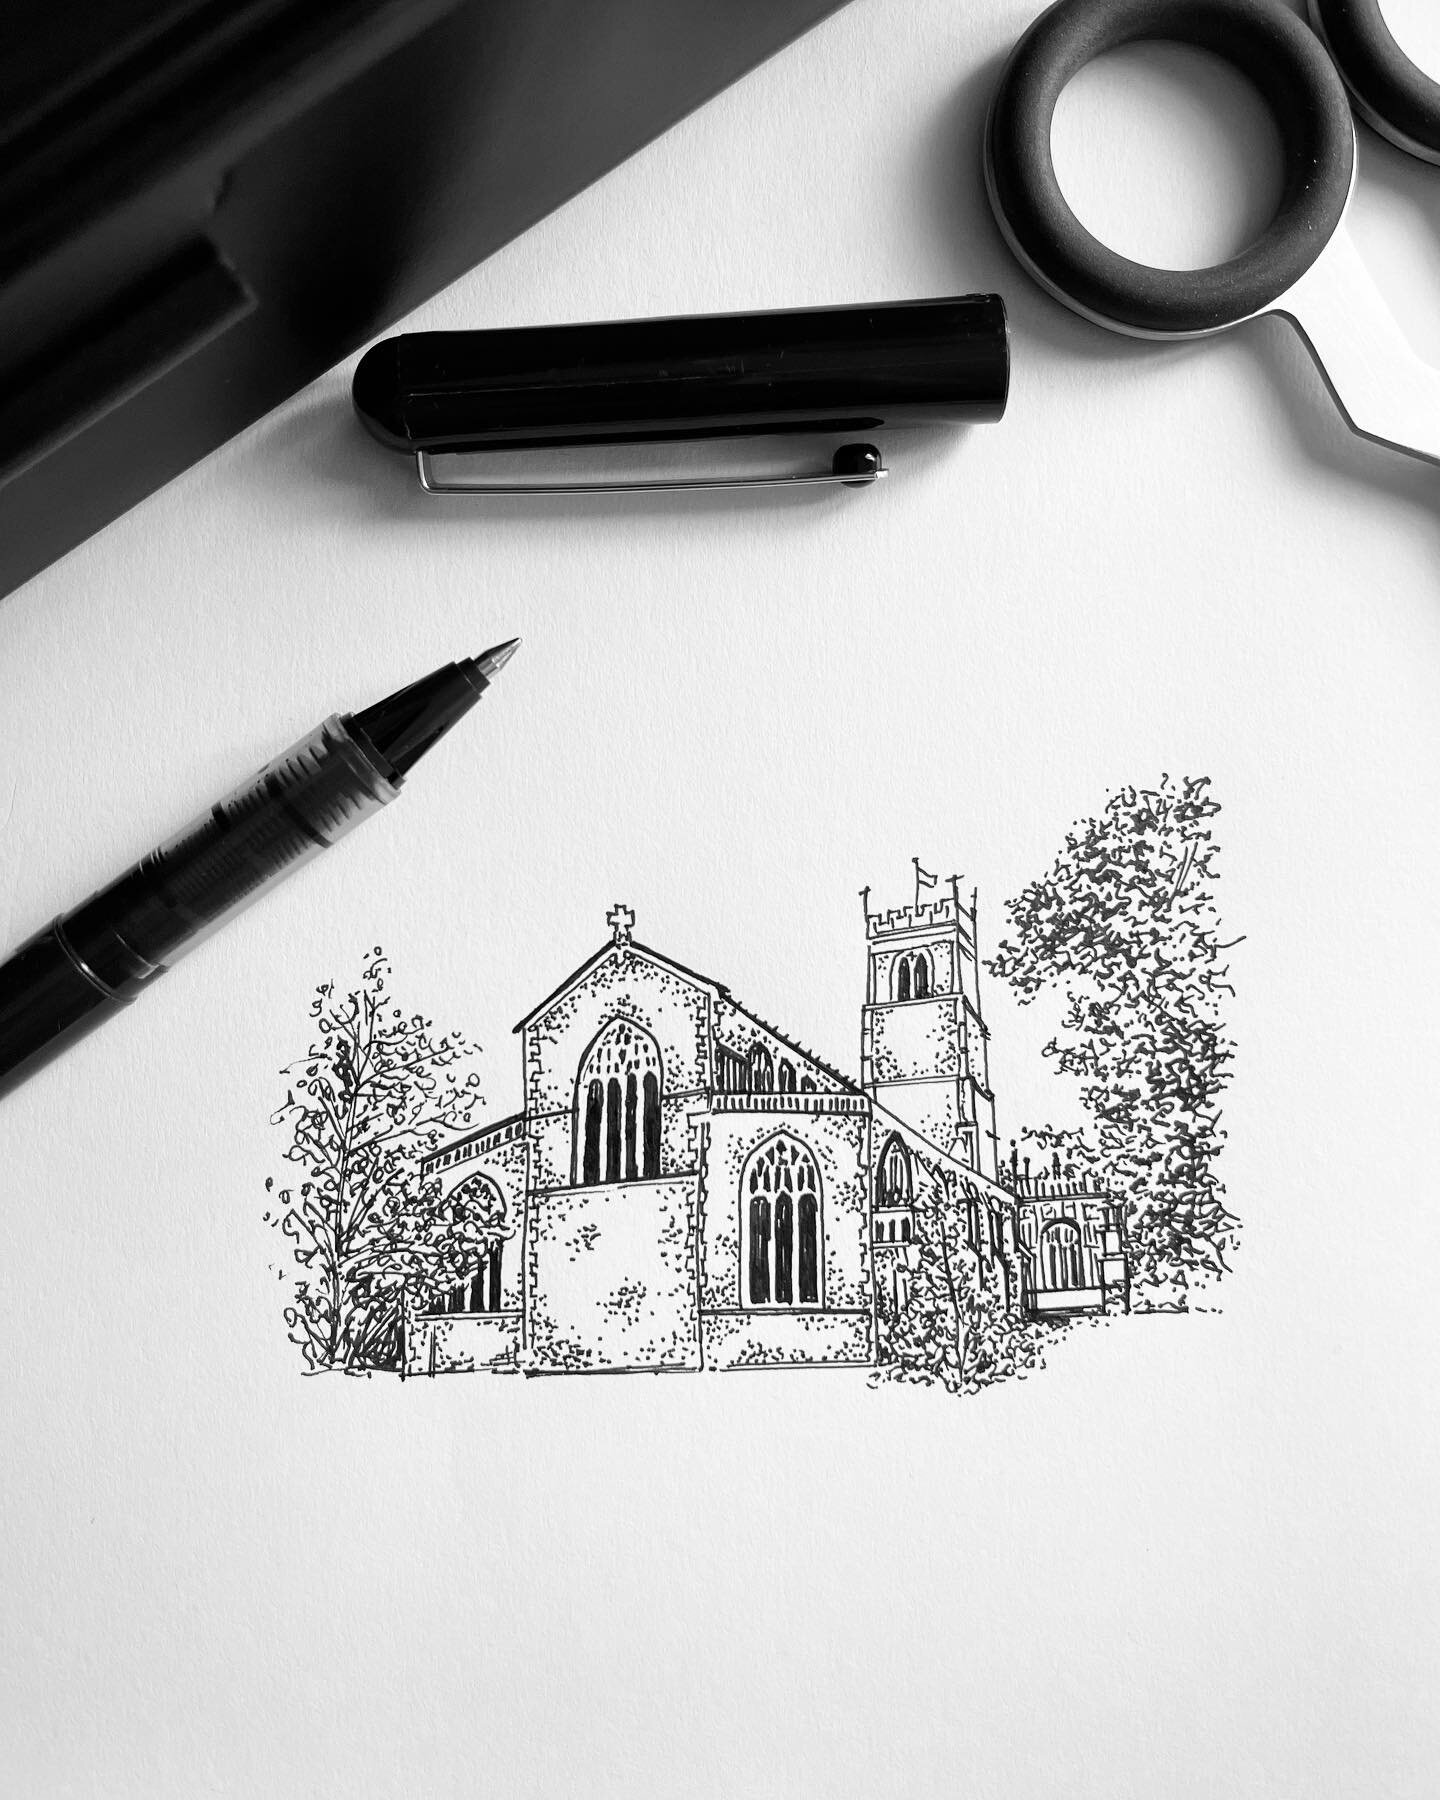 St Mary&rsquo;s Church Woodbridge ⛪️ It was nice to draw our beautiful local church, my youngest goes to a play group here 😌
&bull;
If you&rsquo;re getting married in a church it makes a lovely sketch for your invitations, but you can also use it on